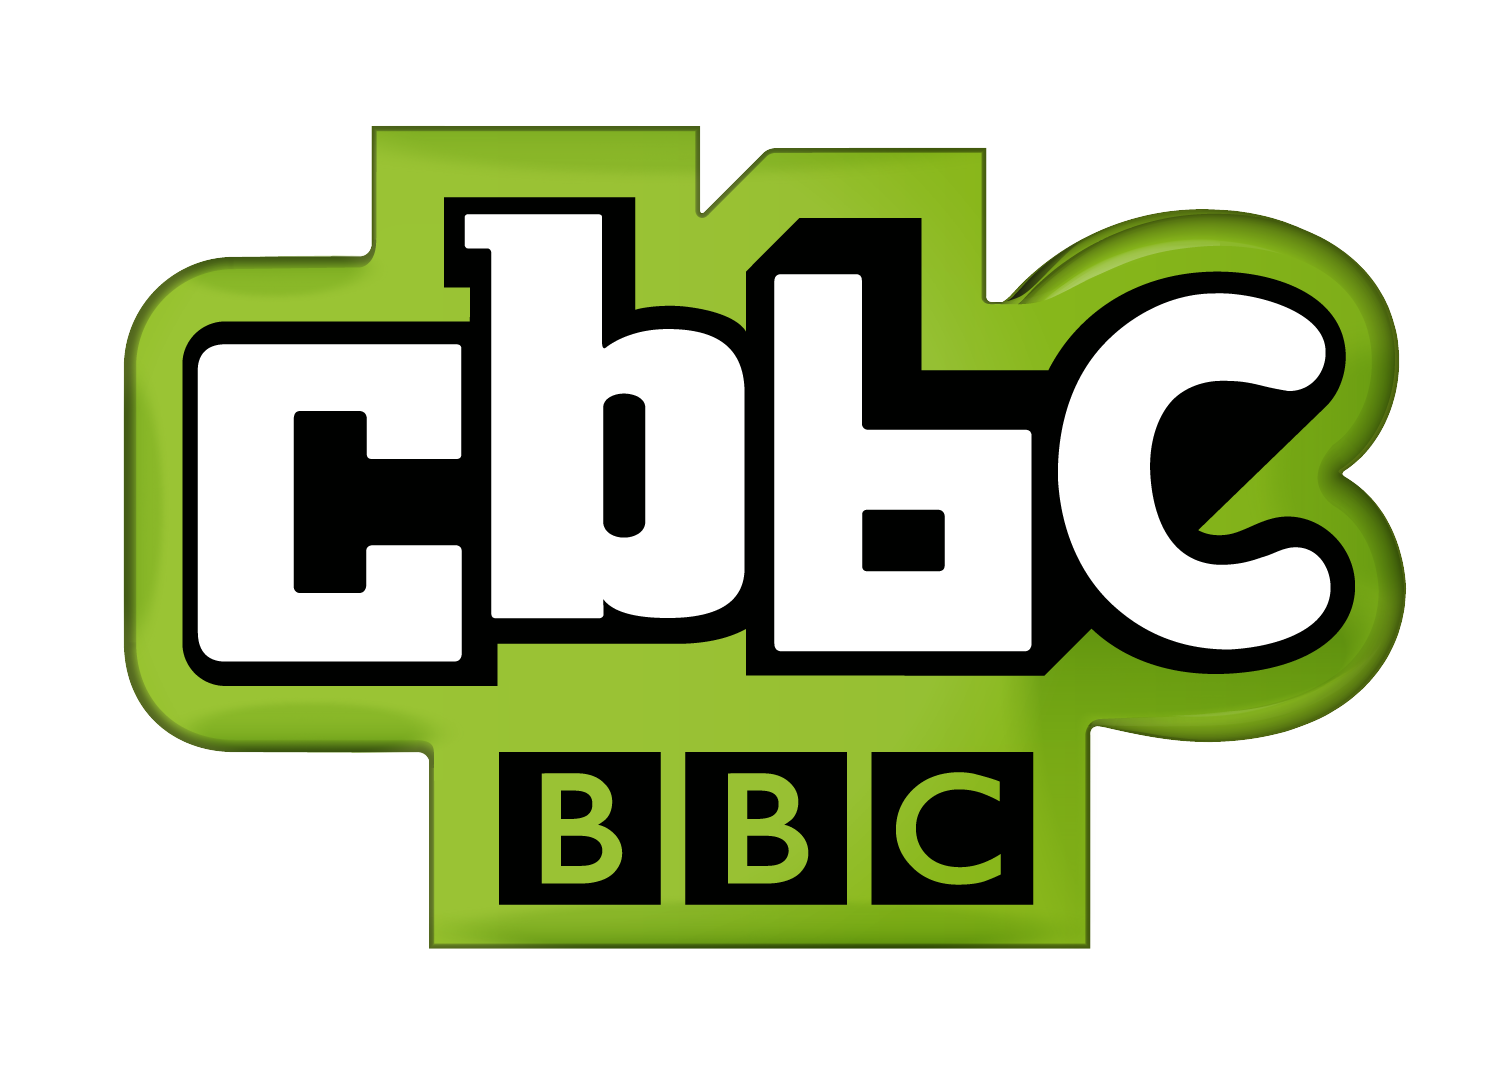 Download The Old Cbbc Website Games Free Peerbackup